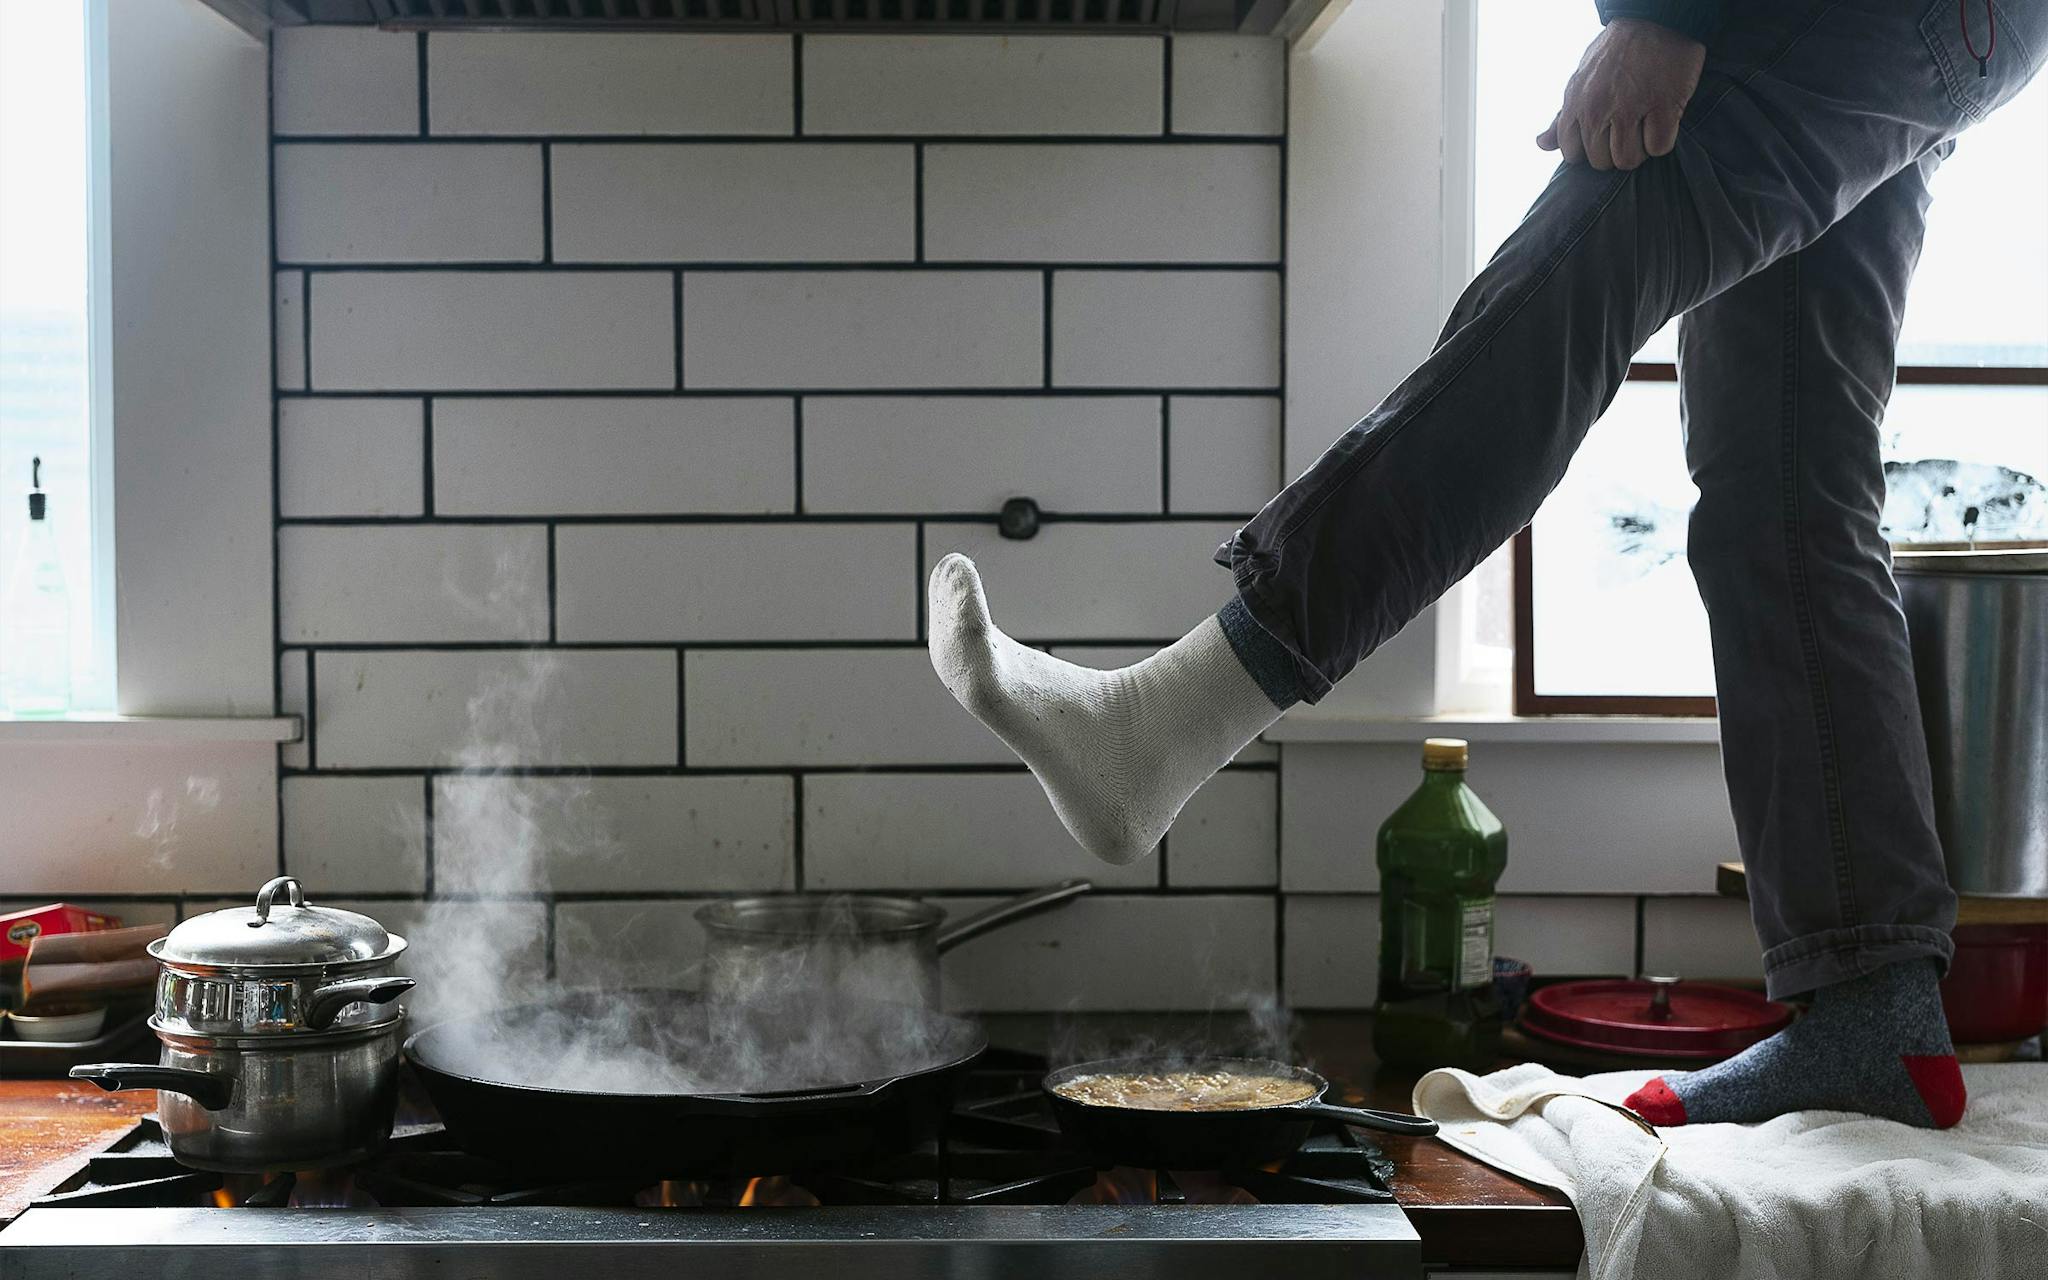 Austin citizen warming his feet over a gas stove during the 2021 Texas snow storm.